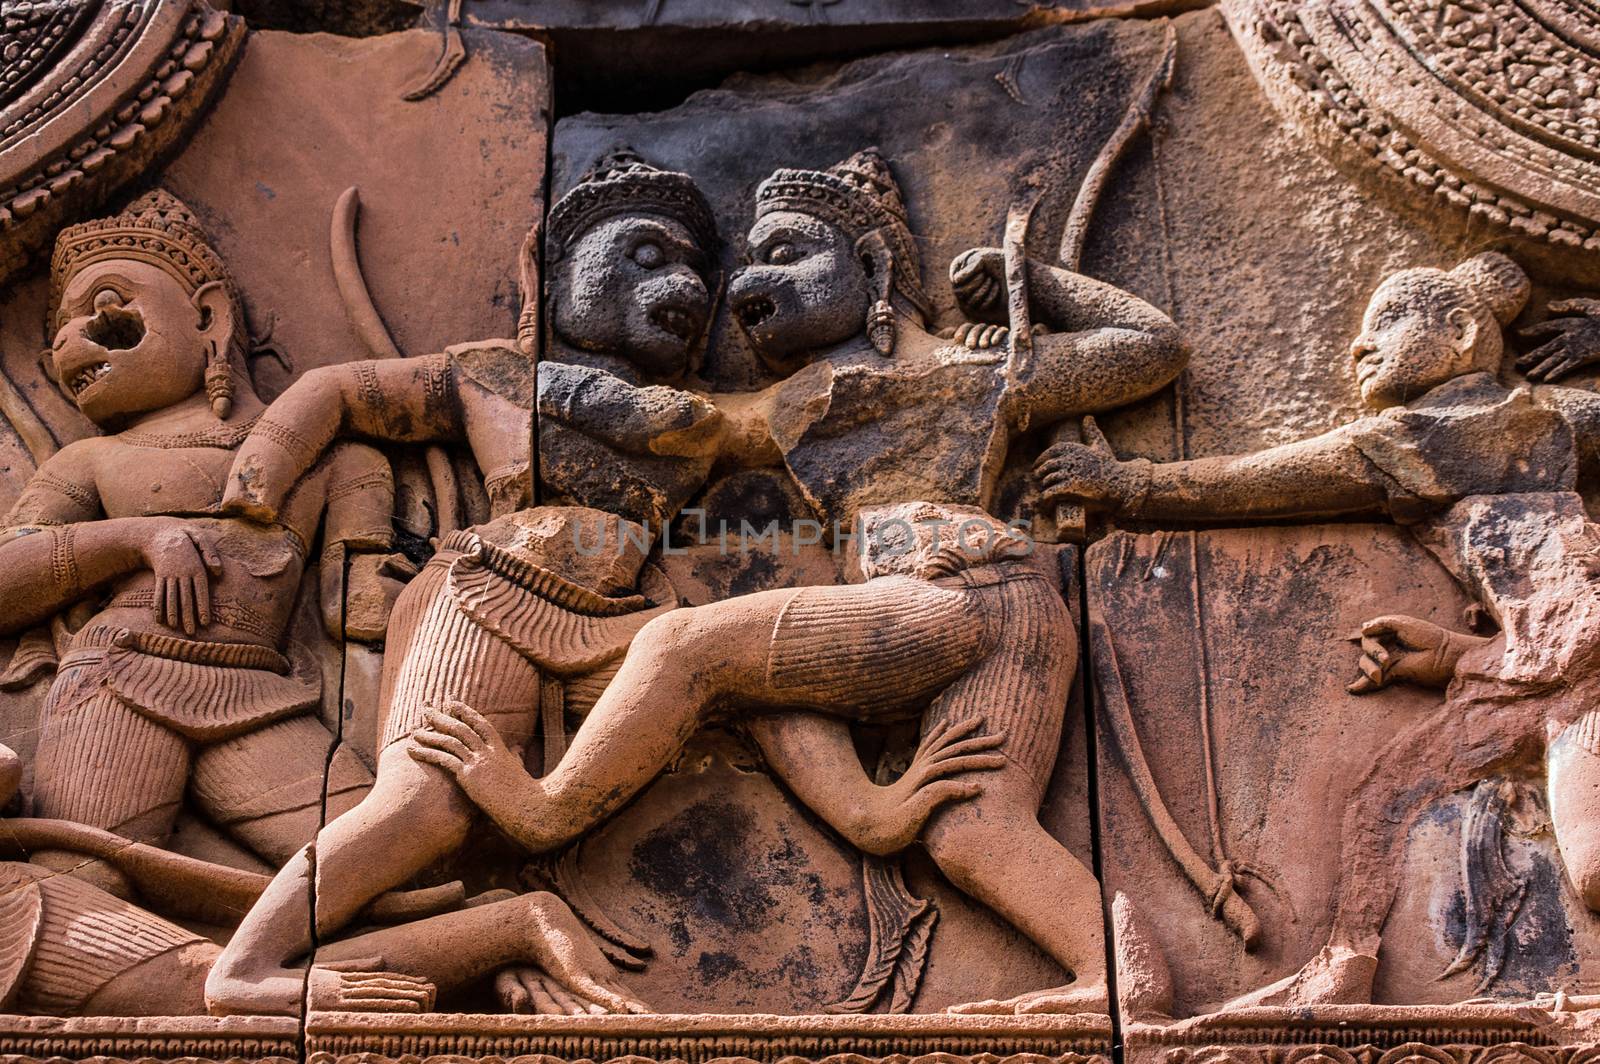 Sugriva and Valin fighting, ancient carving by BasPhoto